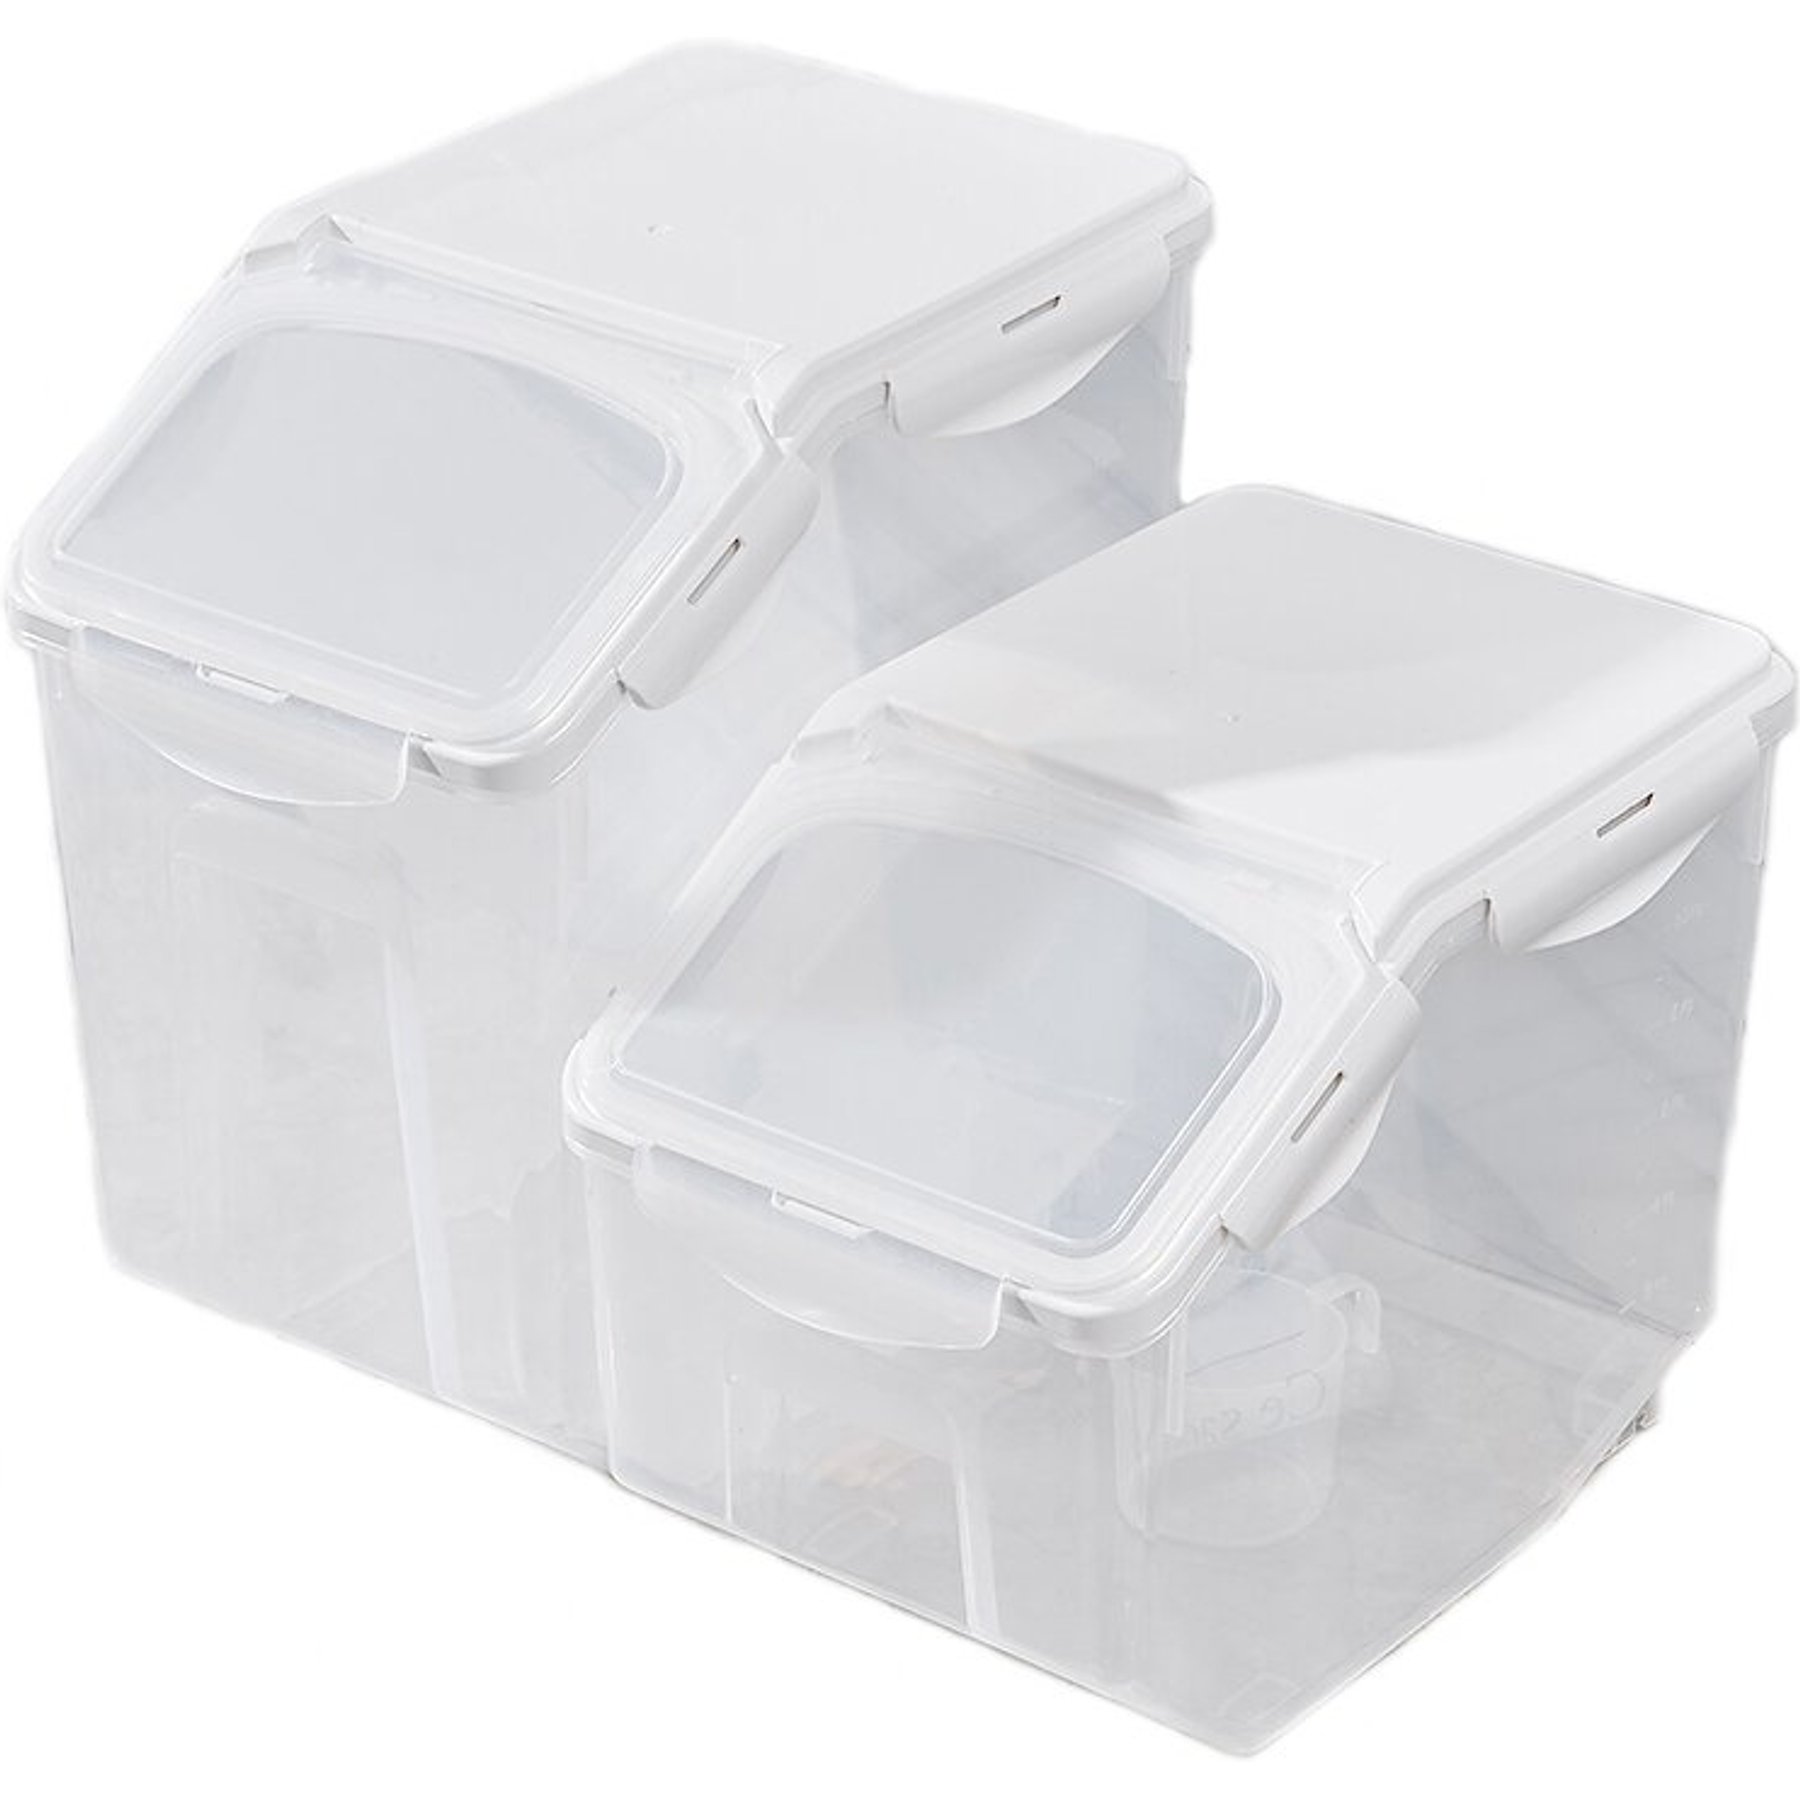 Buy Hobby Life 021400 Small Square Airtight Plastic Food Container